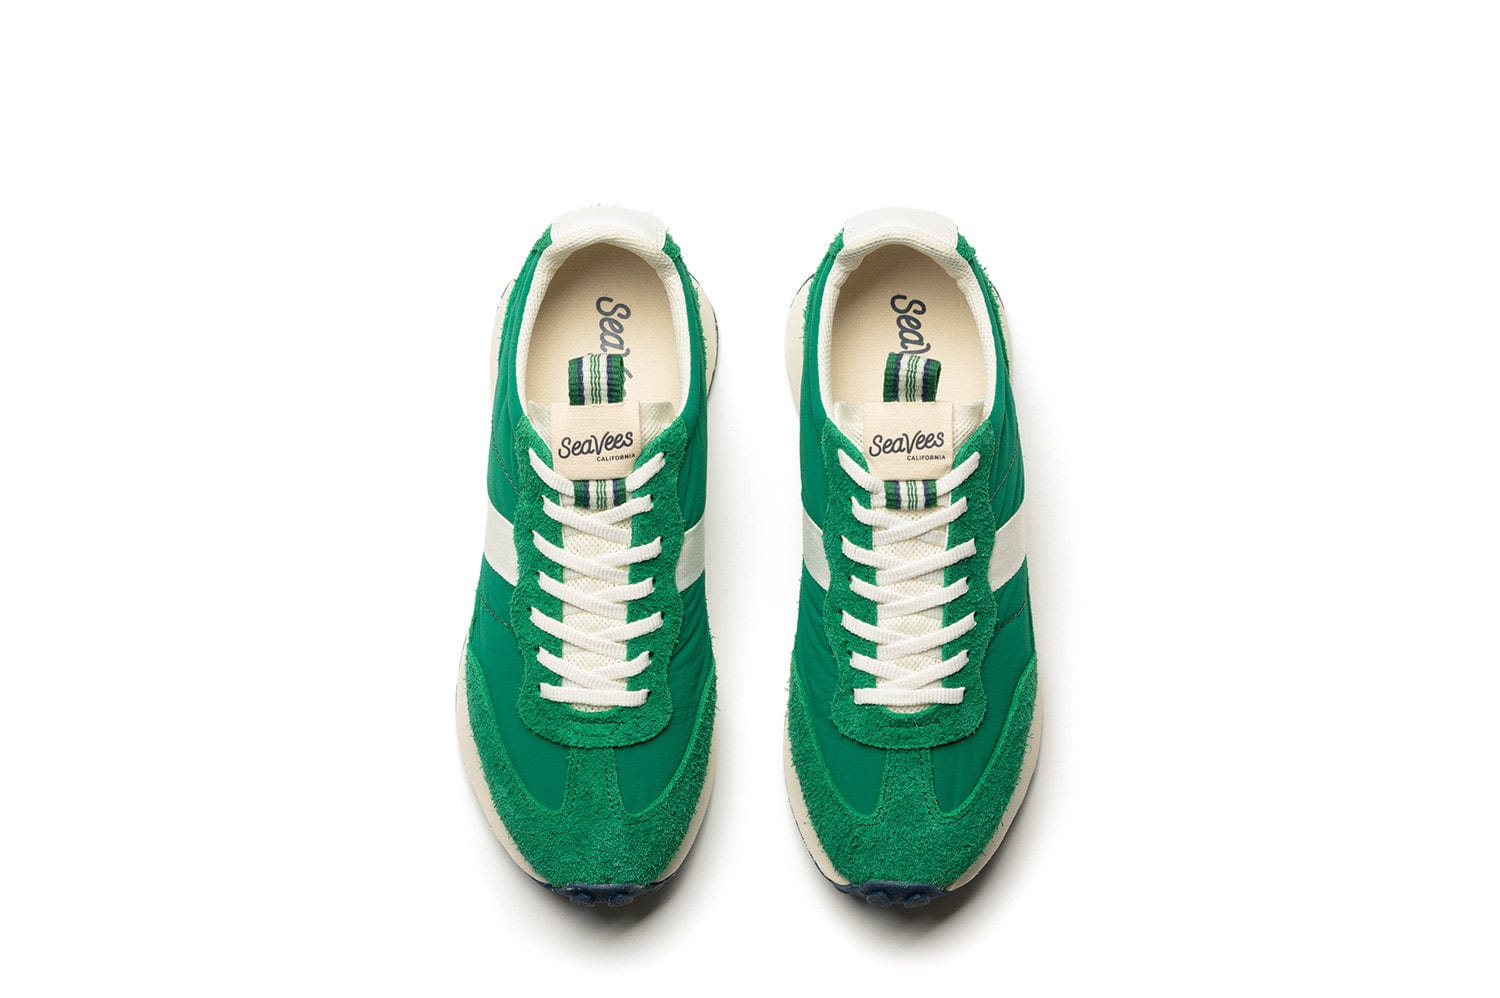 The SeaVees 'Acorn' sneakers in Grass Green from a top view, showing the white laces and branding.